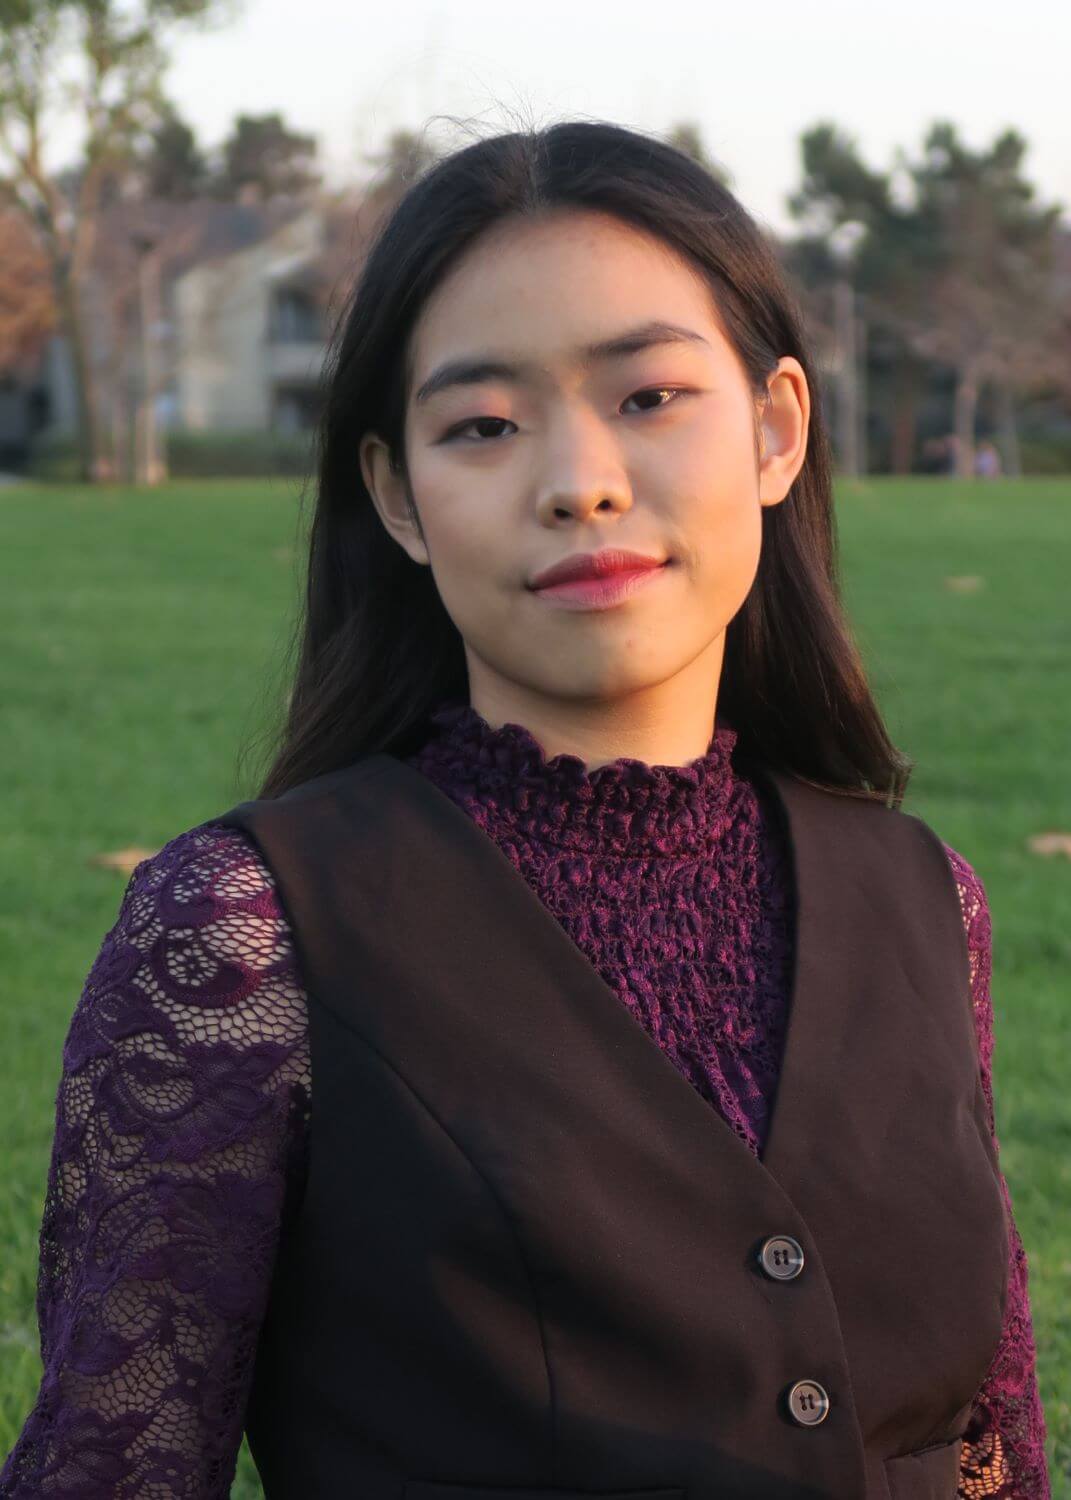 Lacole Yang from head to elbows. Lacole is a Chinese youth with dark hair and eyes. They are smiling. They are wearing a purple blouse and black vest.